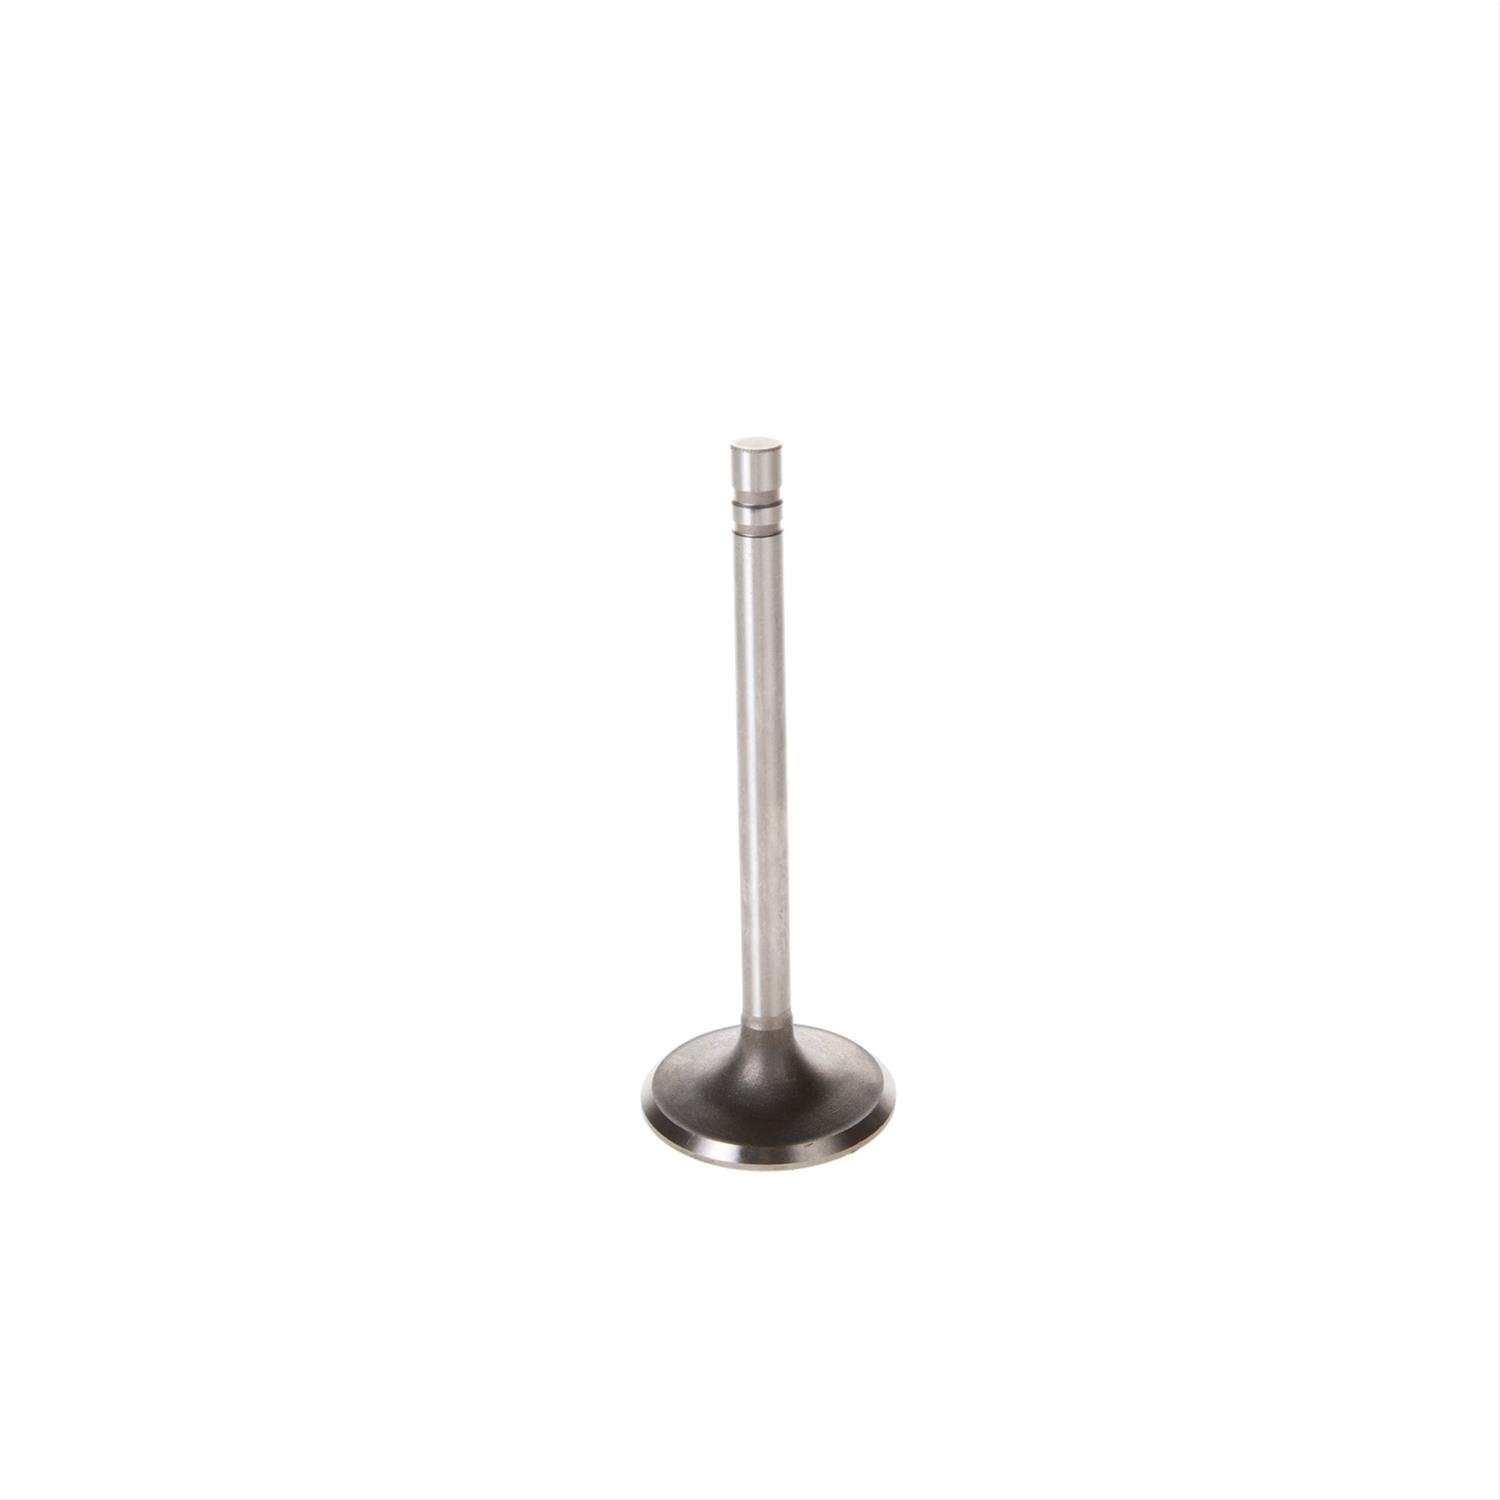 V0560 Stock Replacement Intake Valve